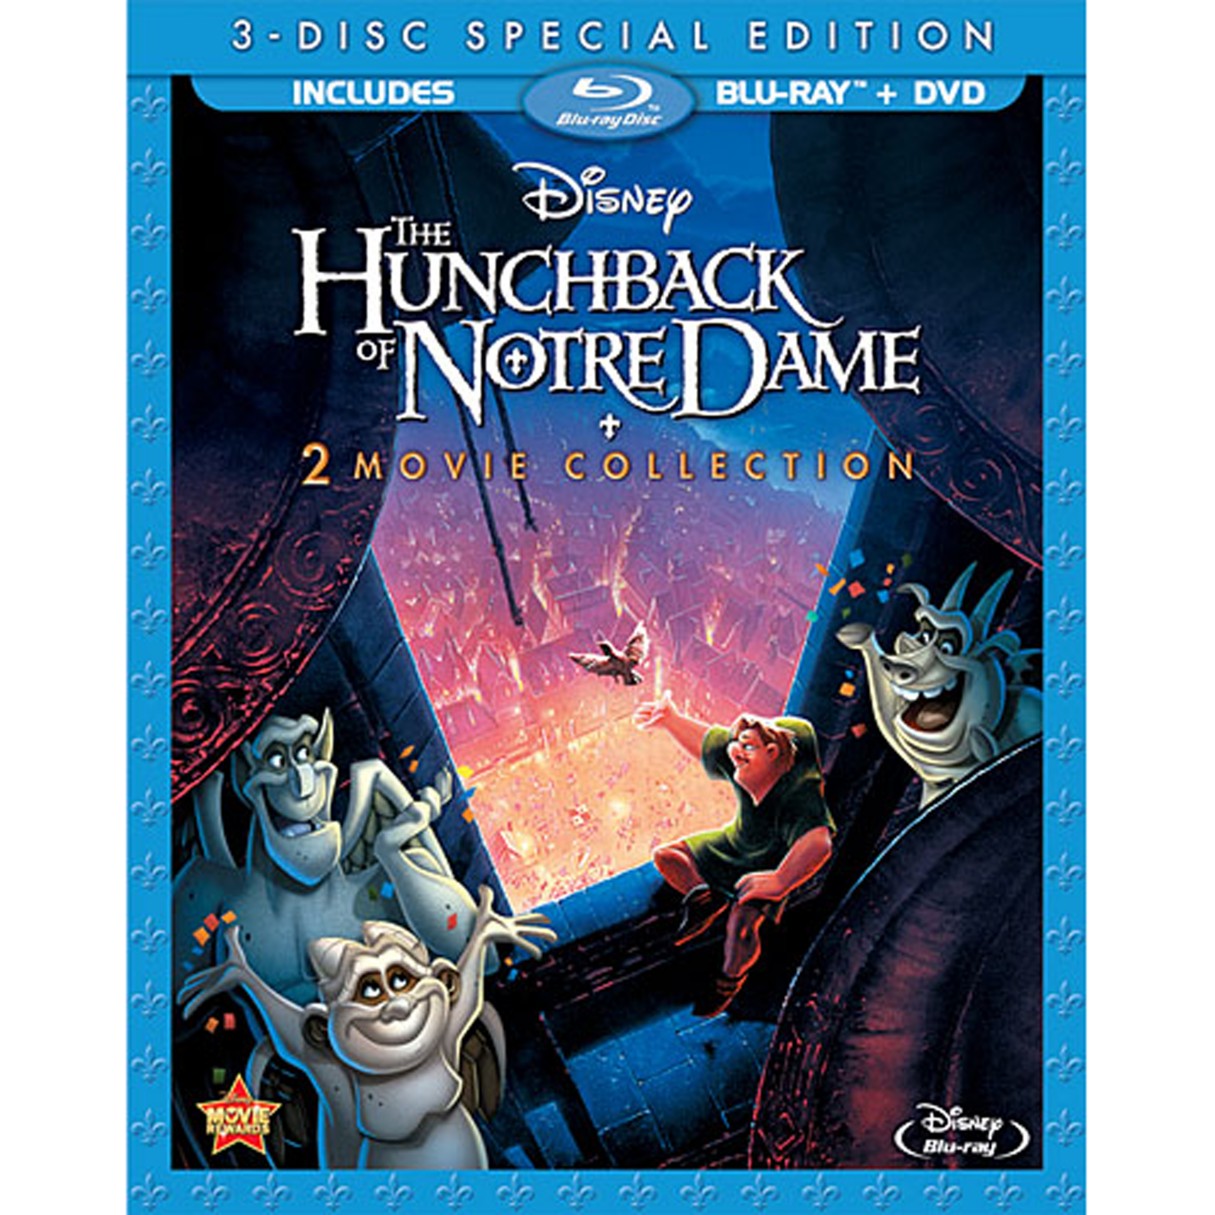 The Hunchback of Notre Dame Blu-ray and DVD Combo Pack